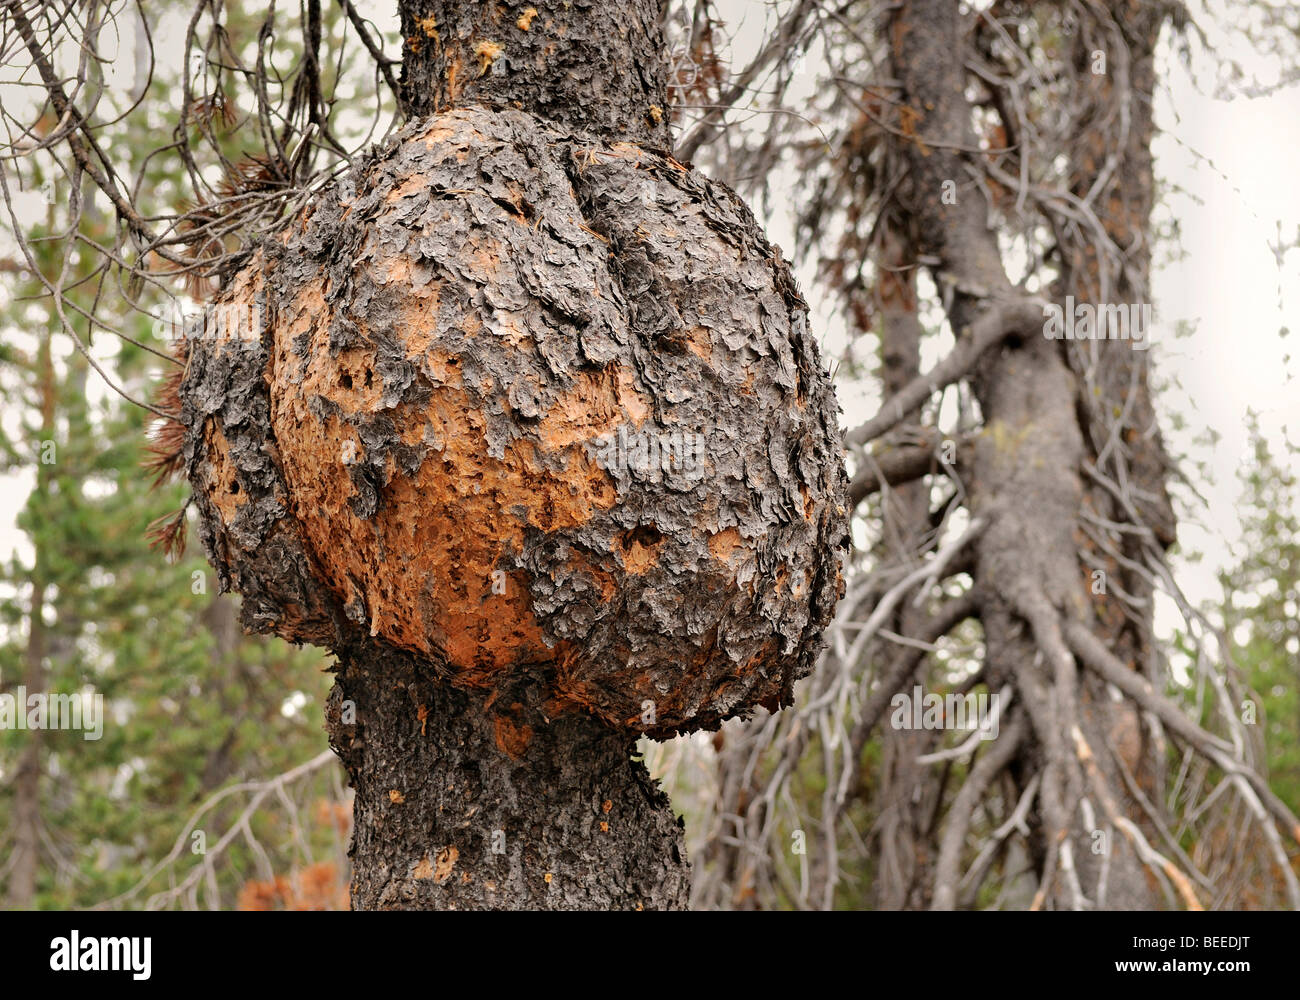 Tree cancer on a Scots Pine (Pinus sylvestris), typical for the Pumice Desert, Oregon, USA Stock Photo